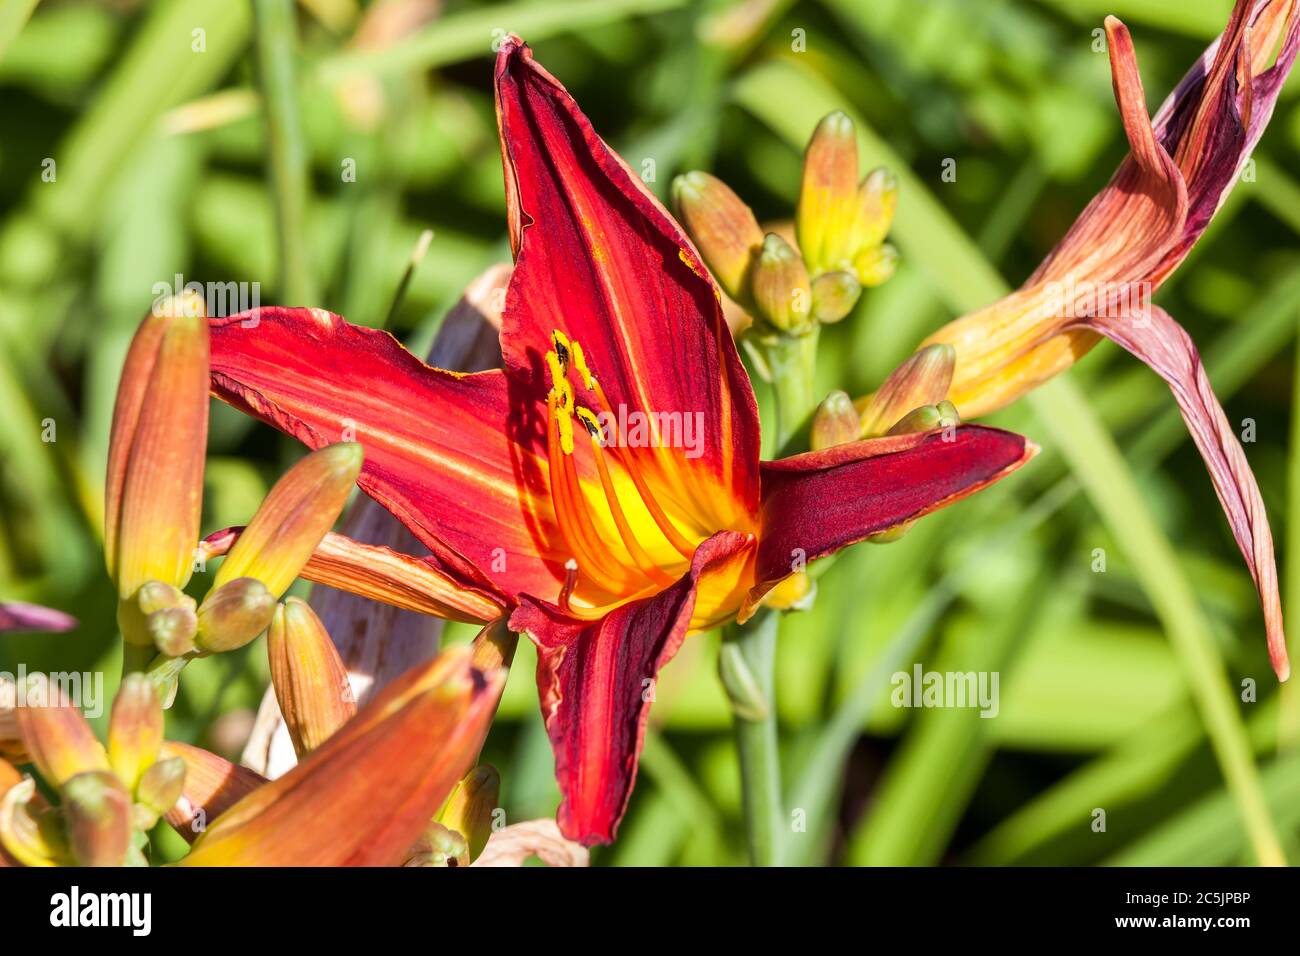 Hemerocallis 'Stafford' a spring flowering plant commonly known as daylily Stock Photo